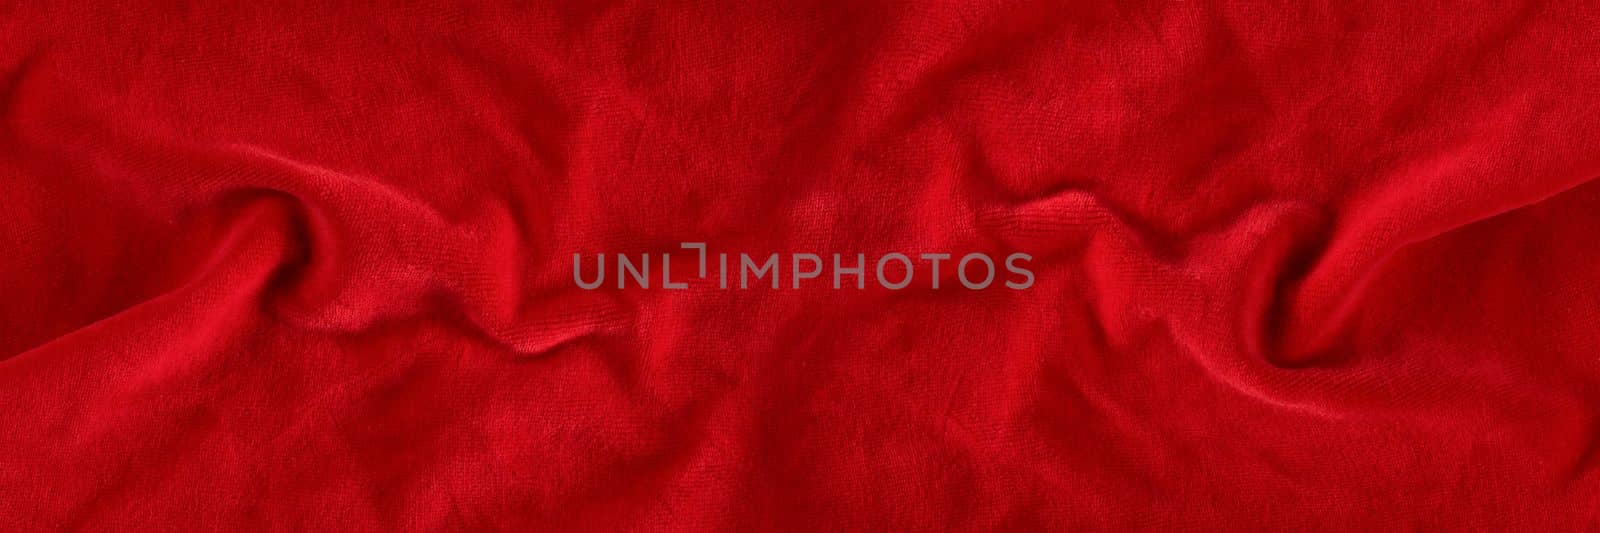 Red velvet texture for postcard or background for design. Red background for Christmas theme or Valentine's day, high quality, large format. Abstract texture of draped red velvet.